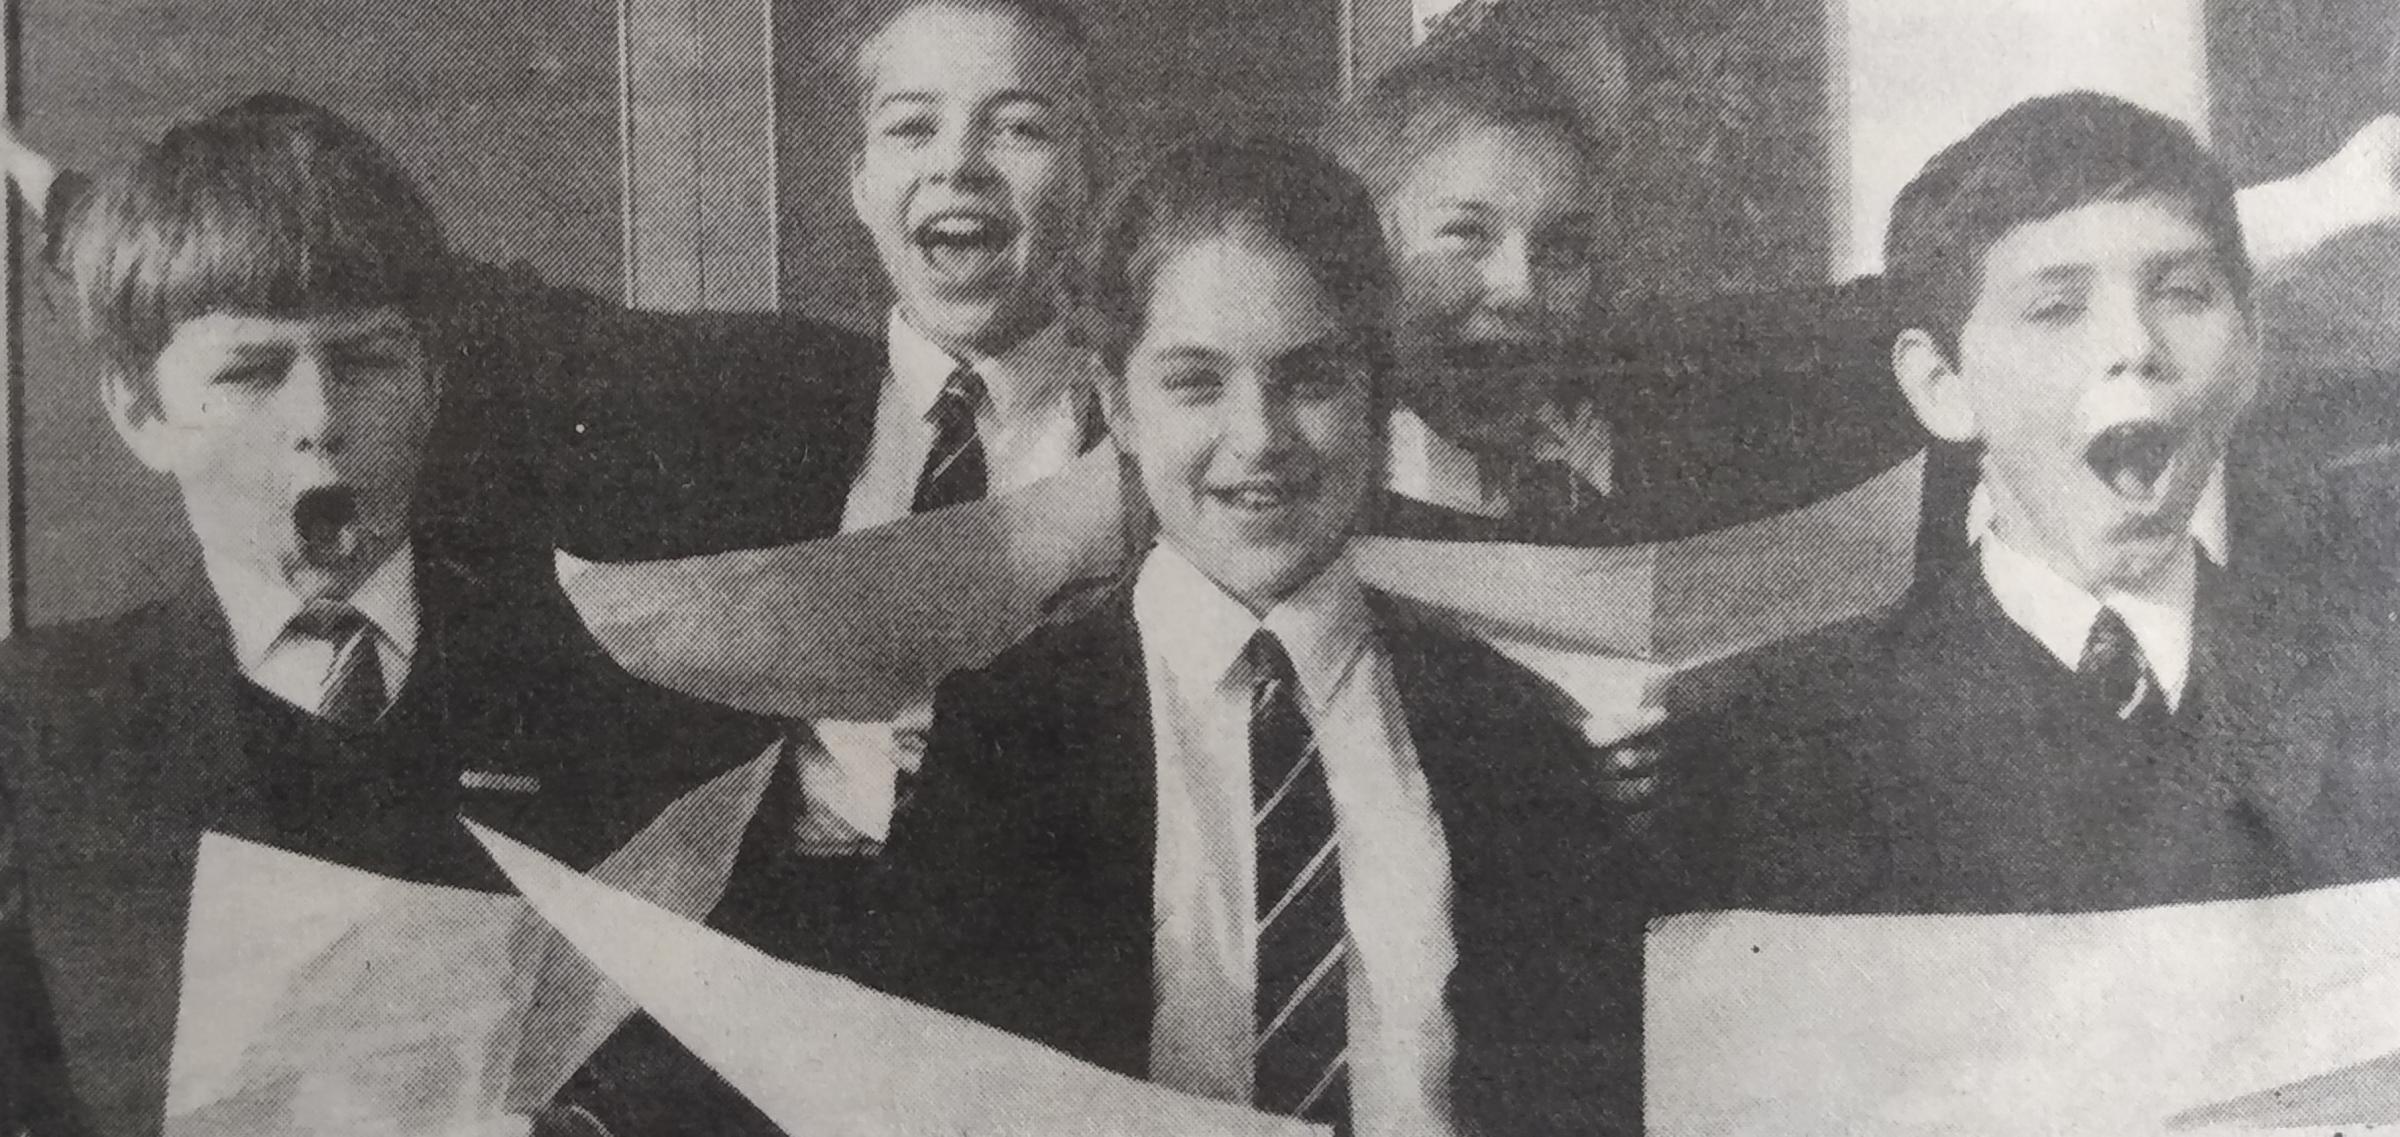 December 1991 and students took part in a singalongathon for Children In Need. From left, Stephen Tyrrell, Sally Ann Taylor, Nicola Homer, Hayley Griffiths and Philip Jolley were among those to take part